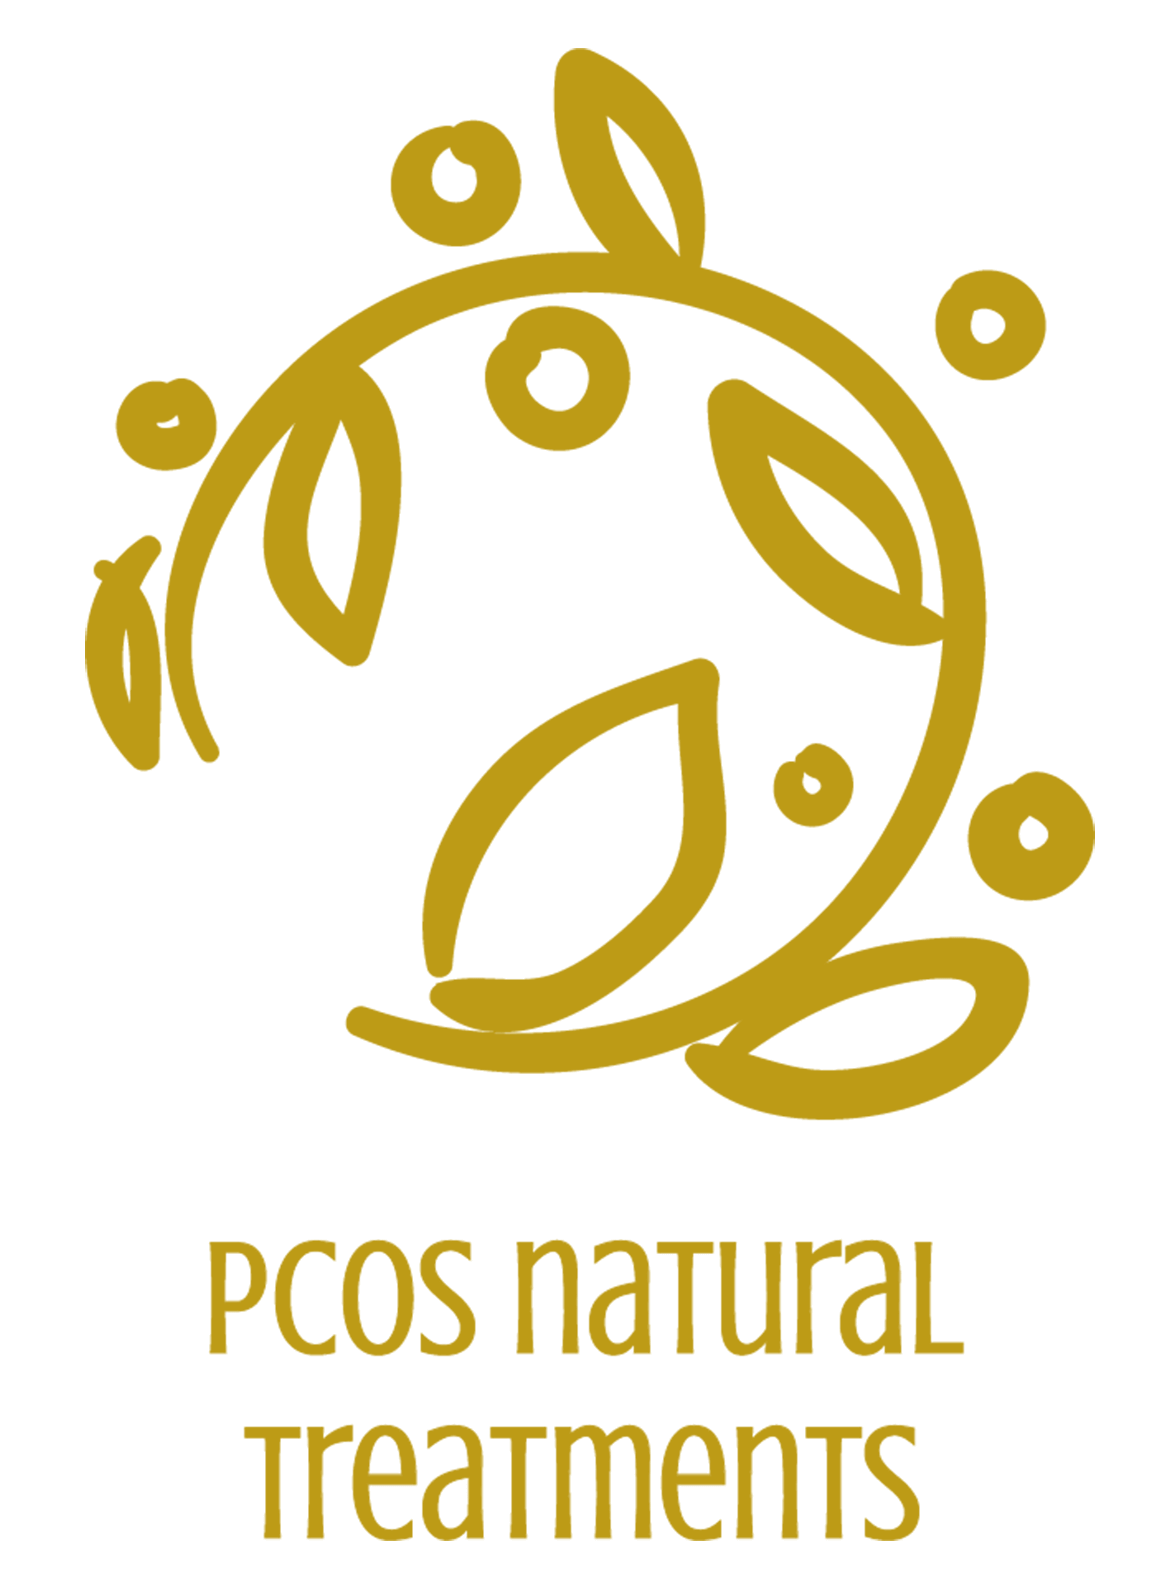 pcos natural treatments logo gold cropped